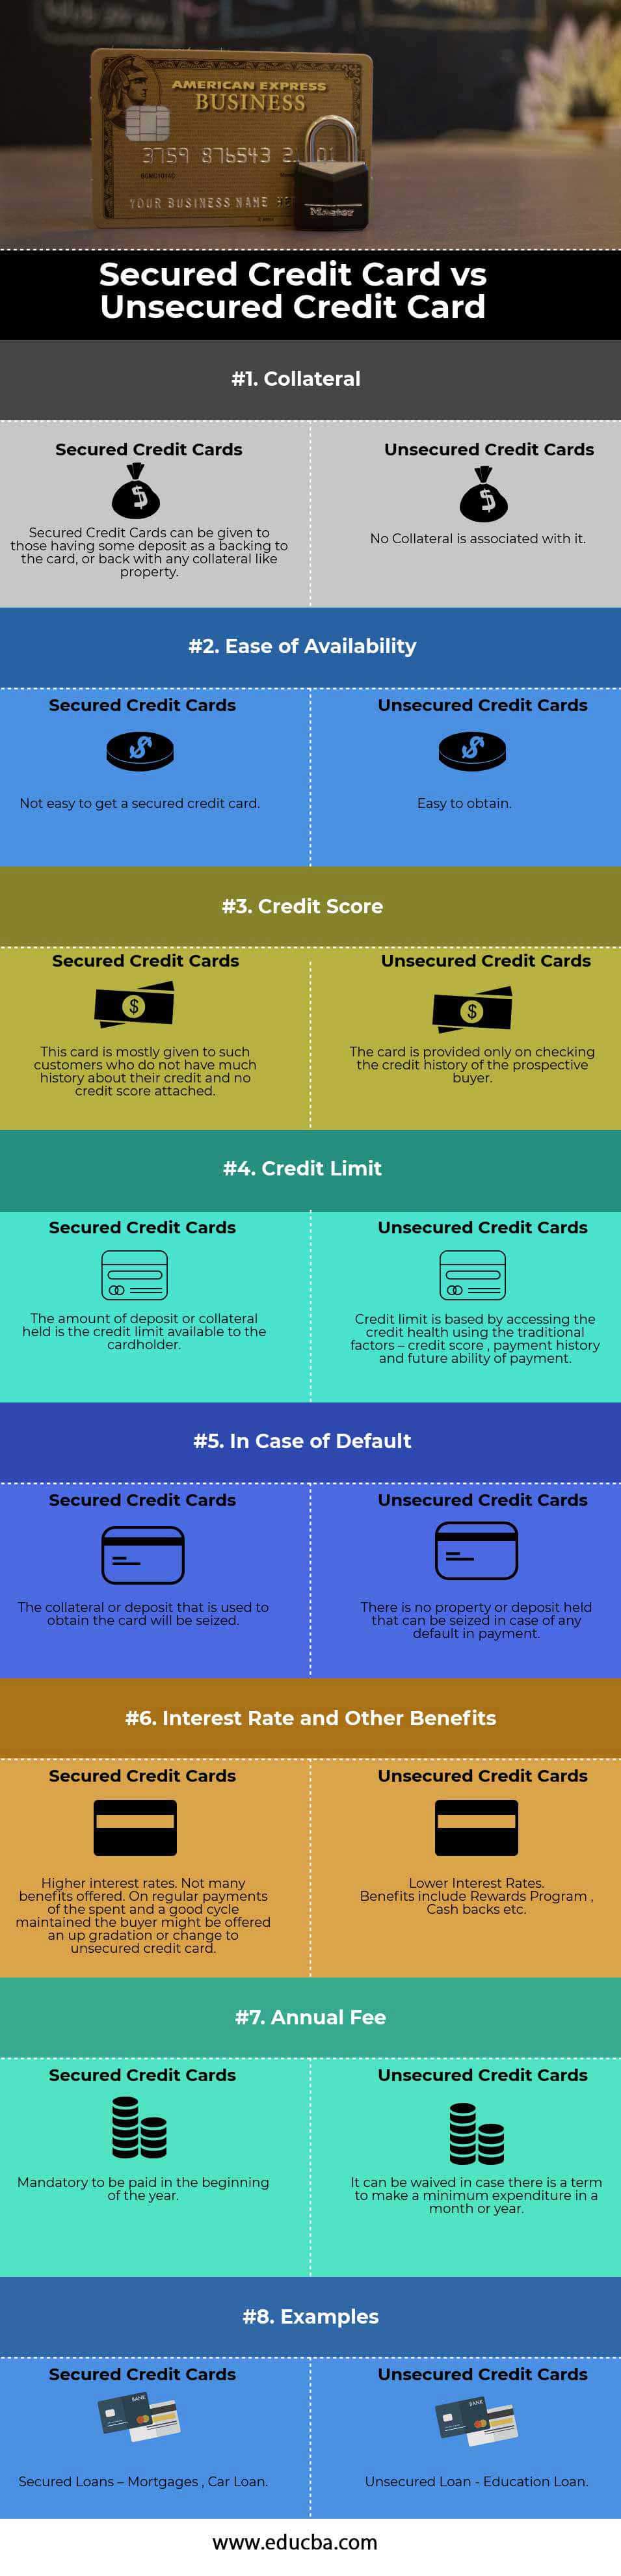 Secured Credit Card vs Unsecured Credit Card info